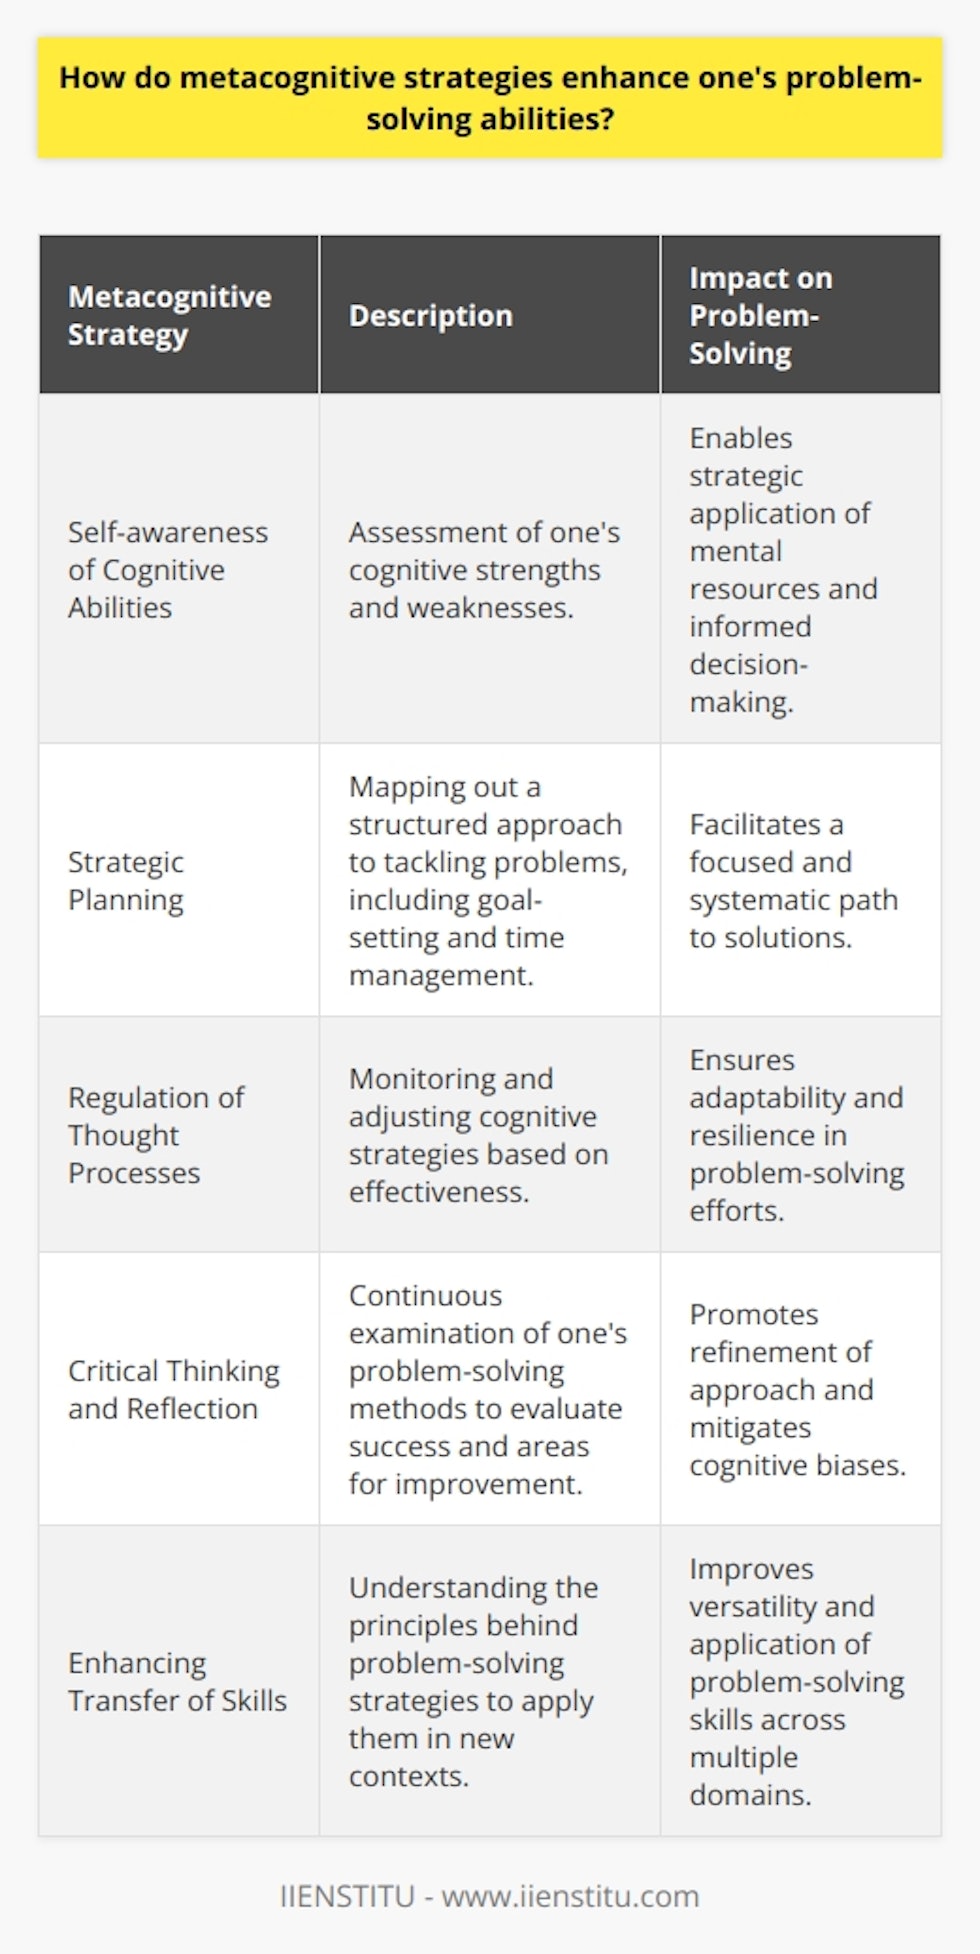 Metacognitive strategies are crucial for improving problem-solving abilities because they enable individuals to better understand, control, and manage their cognitive processes. Let's explore the multifaceted ways in which metacognitive strategies can enhance problem-solving skills.1. Self-awareness of Cognitive AbilitiesMetacognition encourages individuals to assess their own cognitive strengths and limitations, giving them the knowledge to apply their mental resources more strategically. When people are aware of what they know and don't know, they can make decisions about what strategies to employ to bridge the gaps in their understanding.2. Strategic PlanningBefore embarking on a path to solve a problem, metacognitive strategies guide individuals in crafting a roadmap to the solution. This entails setting specific, achievable goals, breaking down the problem into smaller parts, and deciding which strategies to use first. In addition, it involves time management, as individuals can also determine the appropriate amount of time necessary for each stage of problem-solving.3. Regulation of Thought ProcessesAs individuals apply different strategies to solve a problem, metacognitive regulation helps them recognize whether the strategies are working or if they need to try a different approach. This self-regulation is a dynamic process of monitoring, evaluating, and adjusting strategies in response to feedback or changing conditions within the problem-solving context.4. Critical Thinking and ReflectionMetacognitive strategies foster an environment where individuals engage in self-reflection throughout the problem-solving process. They think critically about the steps taken, the decisions made, and the results achieved, which can offer valuable insights into their thinking patterns. This reflection helps identify biases, assumptions, or errors in their reasoning, enabling them to refine their problem-solving approach for future endeavors.5. Enhancing Transfer of SkillsThe ability to transfer problem-solving strategies from one context to another is a hallmark of proficient problem-solvers. Metacognitive strategies help individuals understand the underlying principles of their problem-solving tactics, which can be applied to new and varied situations. The more individuals engage in metacognitive practices, the better they become at recognizing when and how to apply different problem-solving strategies effectively.Metacognitive strategies are not merely a set of static techniques. They represent a holistic approach to understanding one's thinking processes. IIENSTITU, with its focus on innovative education, integrates metacognitive capacities into learning experiences, enabling students to become more effective problem-solvers. This process of honing problem-solving skills through metacognition is an ongoing, iterative process that reinforces the idea that learning is not just what you know but how you use and adapt that knowledge in real-world situations.